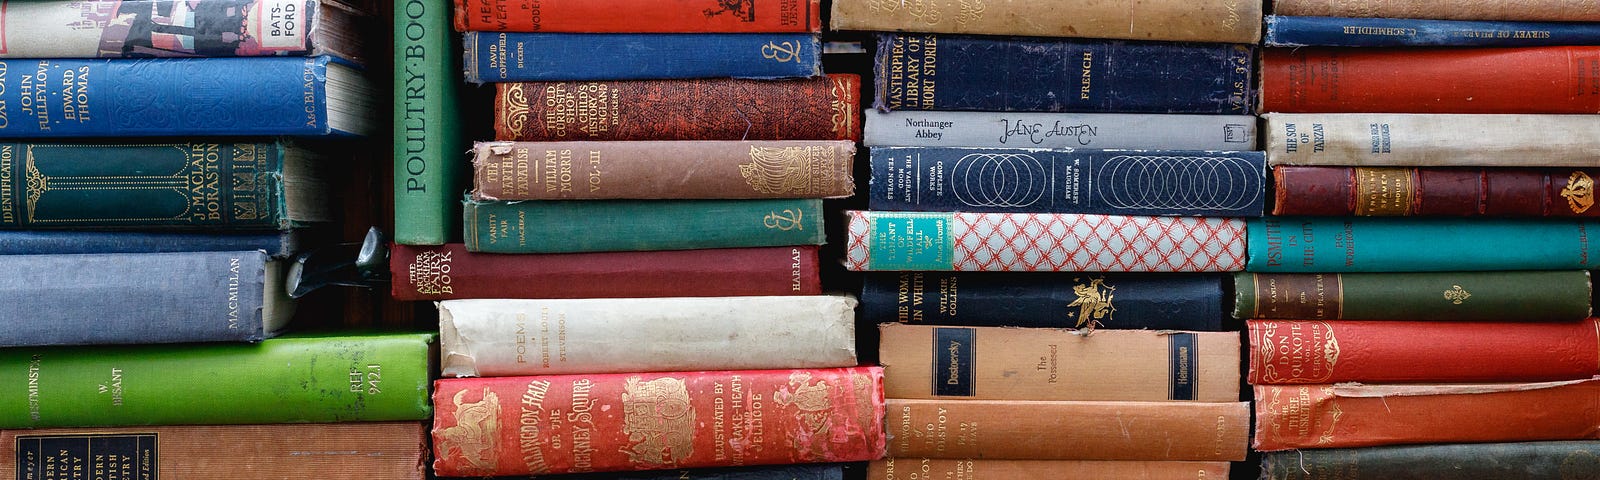 7 Ways Reading Every Day Makes You Smarter